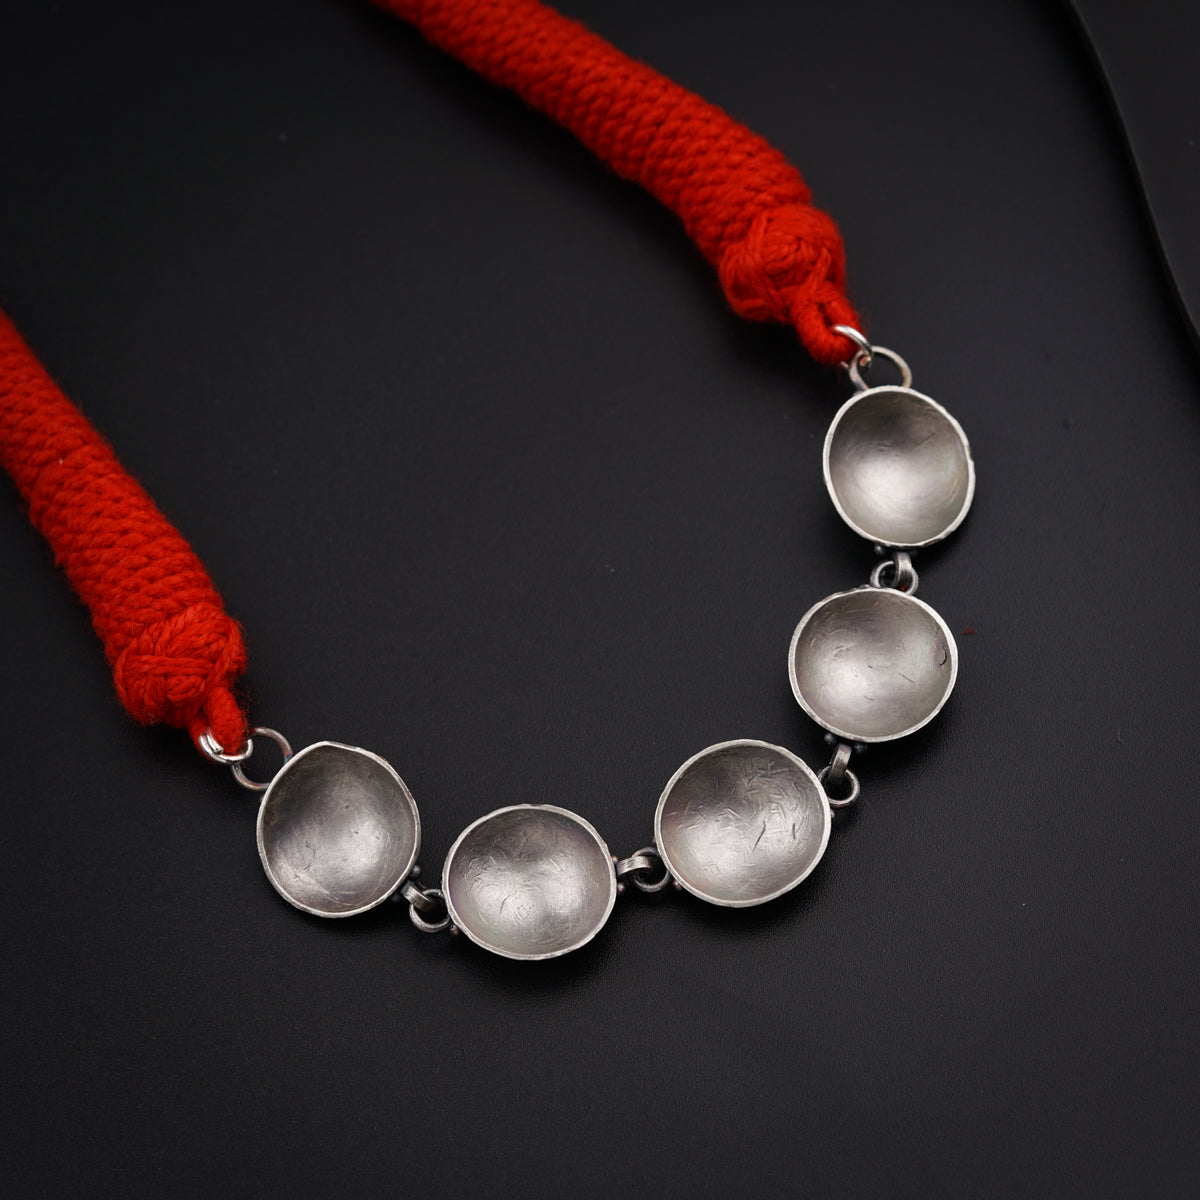 a silver necklace with three circles on a red cord